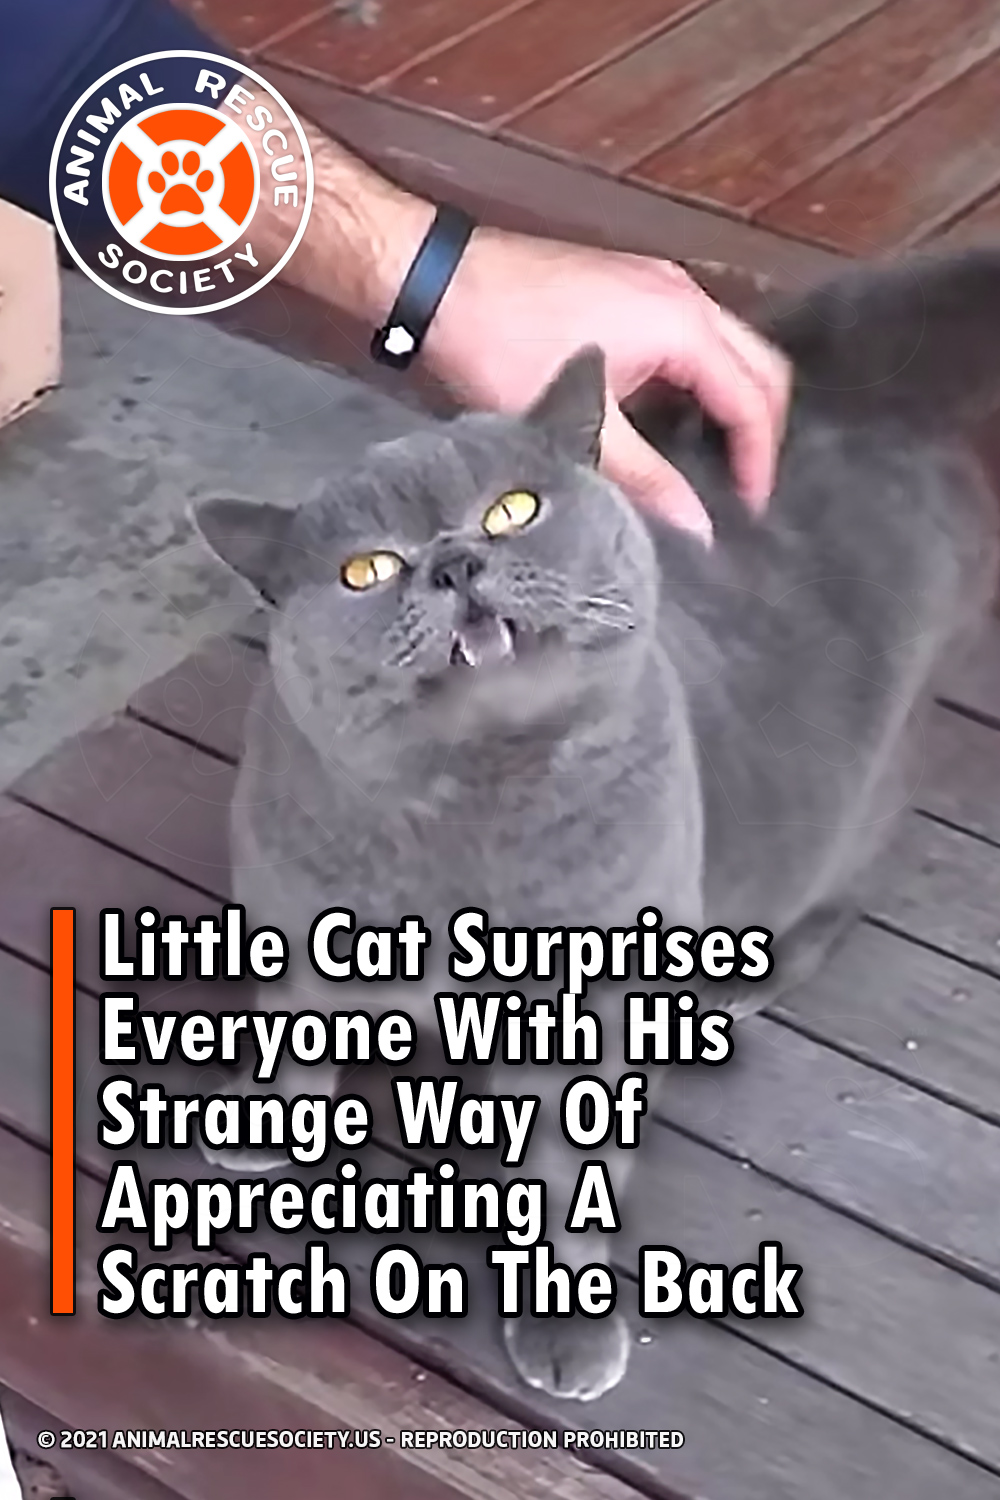 Little Cat Surprises Everyone With His Strange Way Of Appreciating A Scratch On The Back